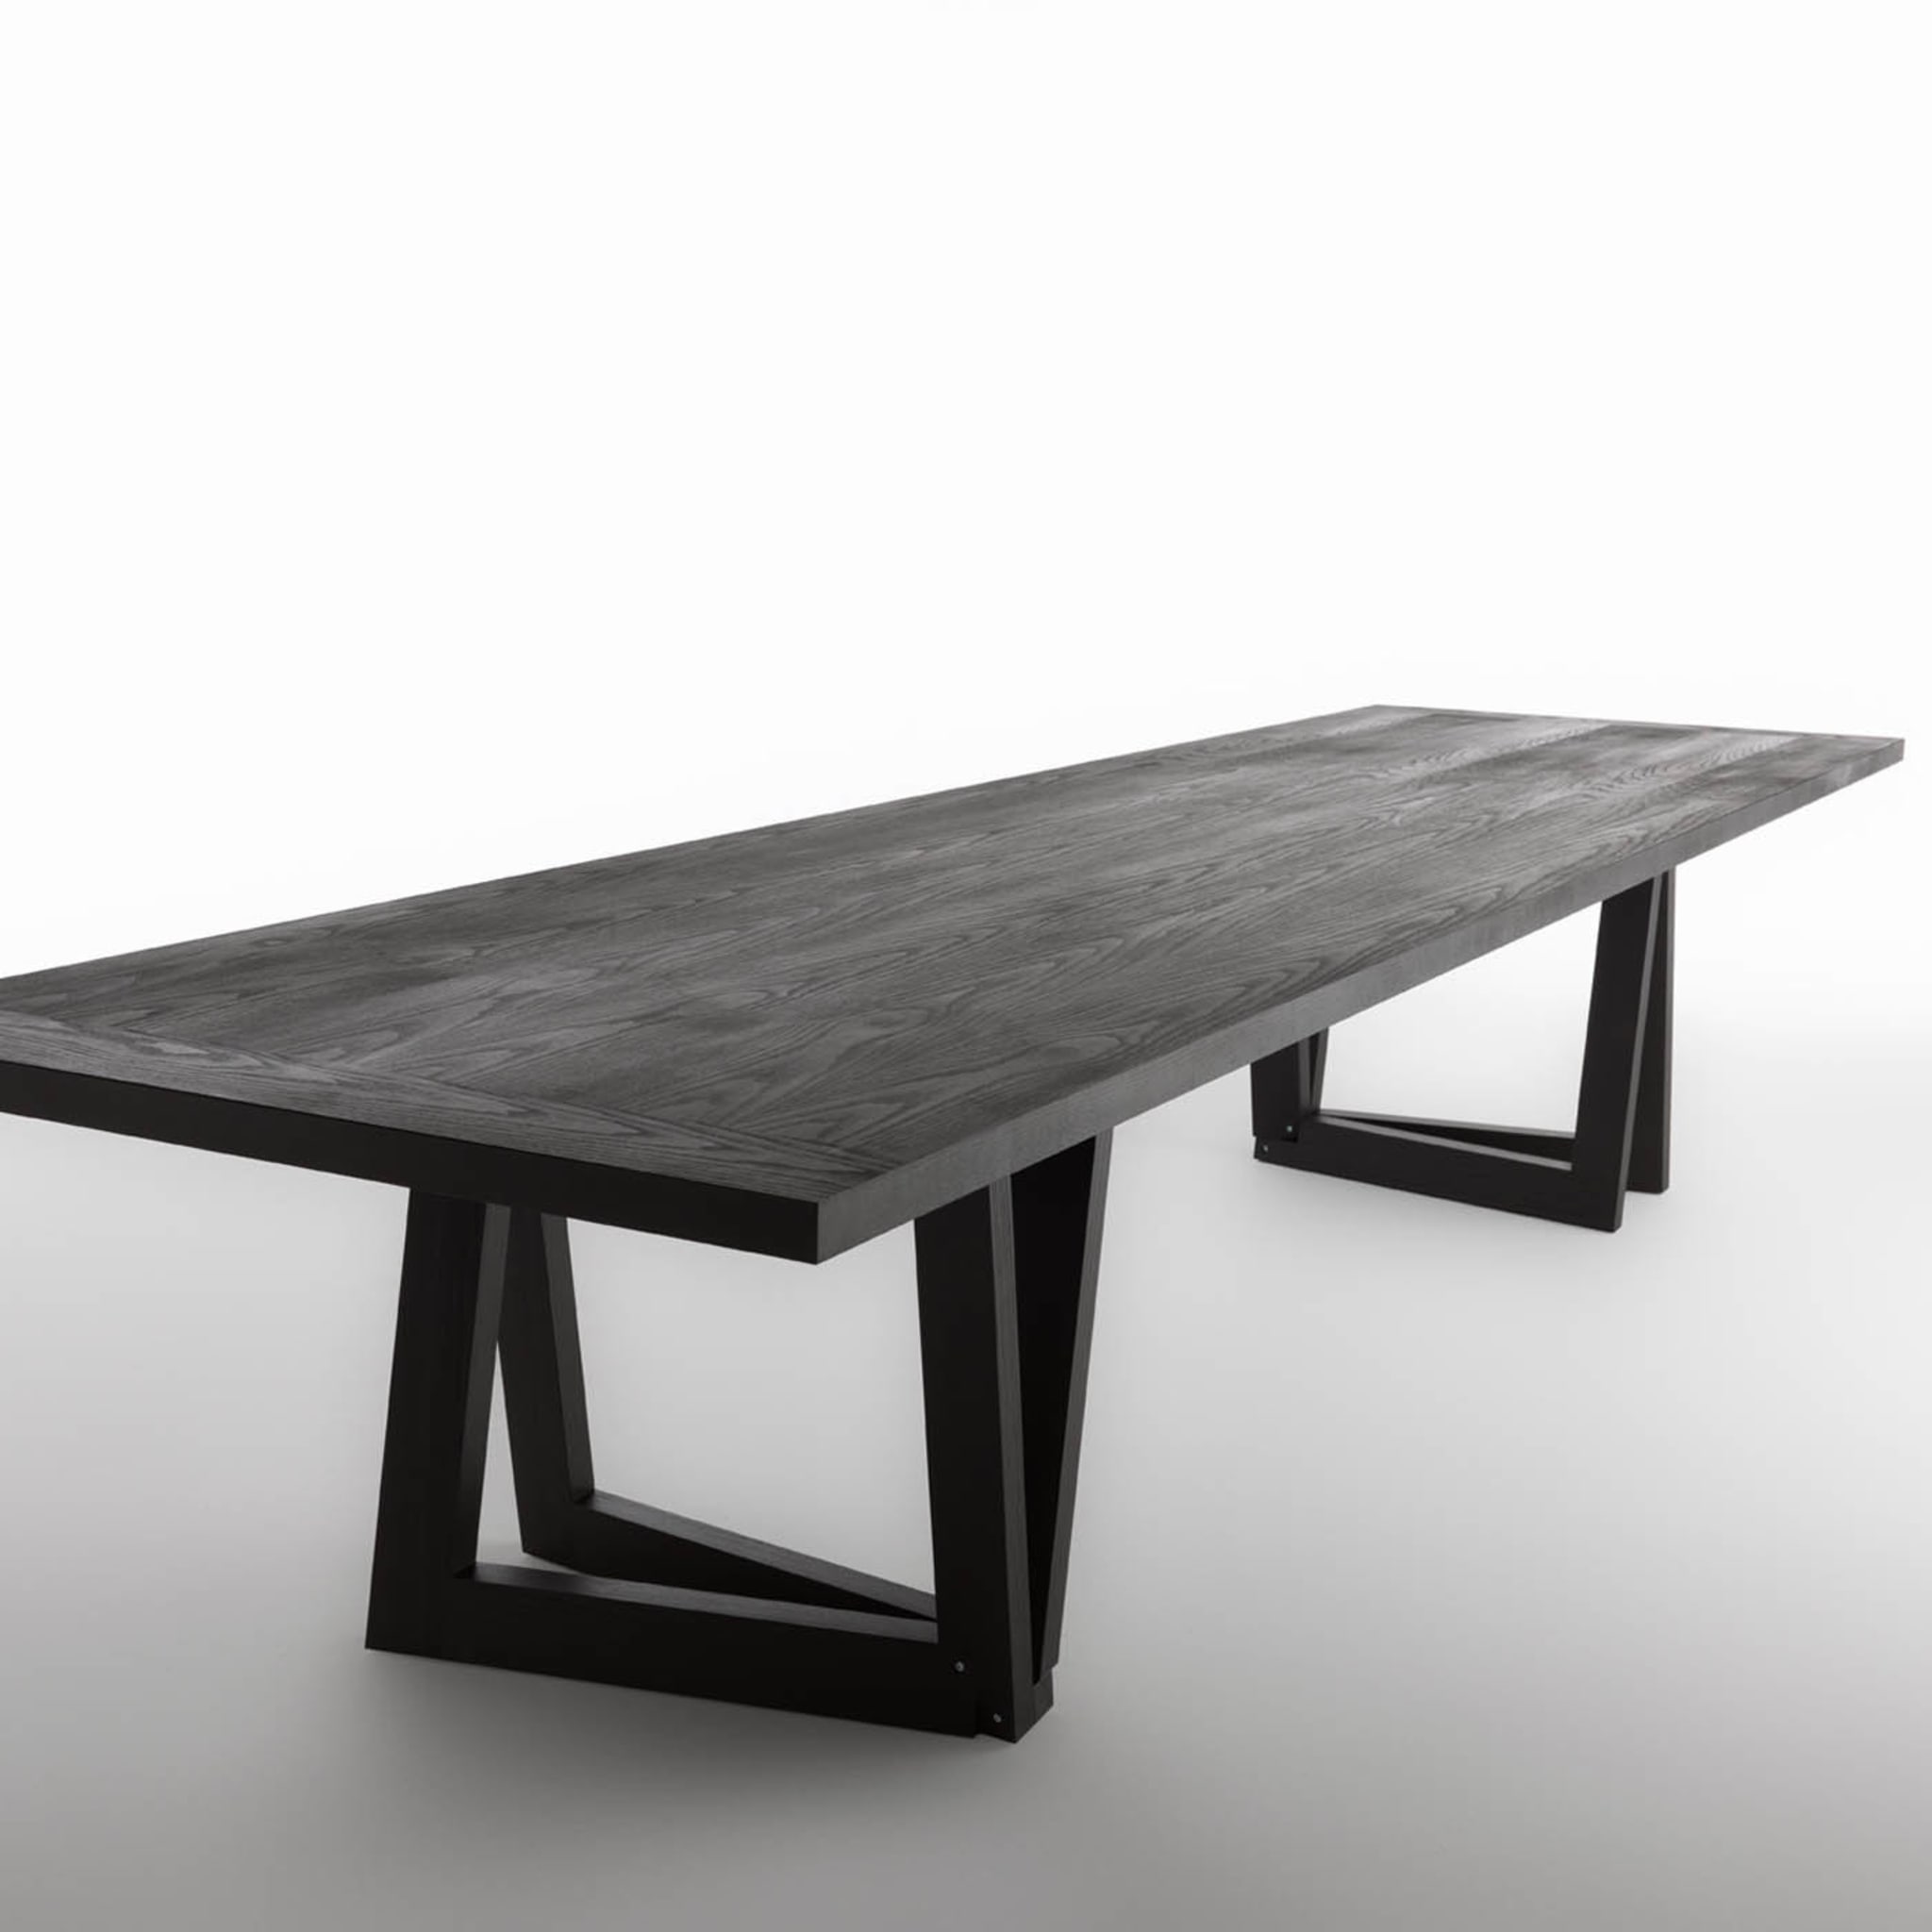 QuaDror 03 Dining Table by Dror - Alternative view 2